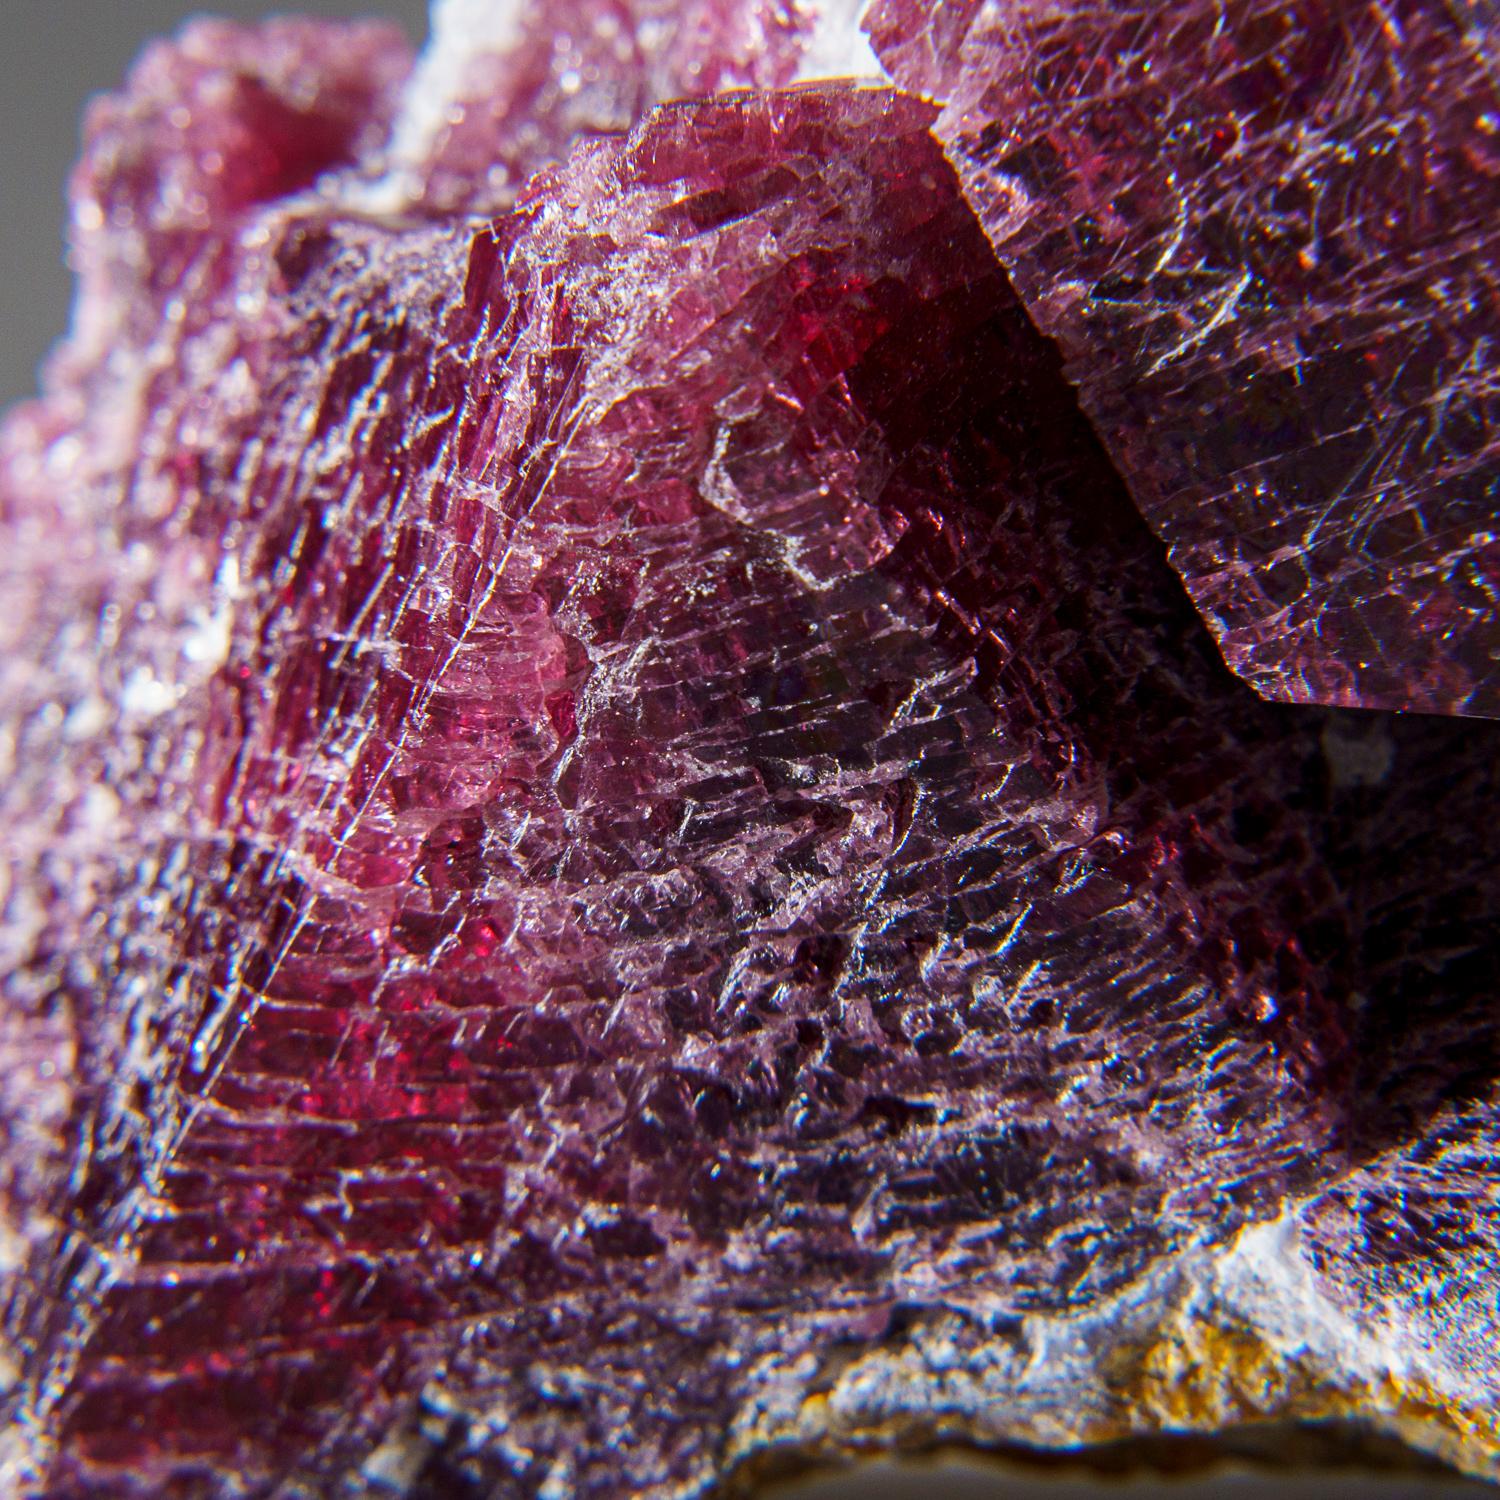 From Mogok, Sagaing Division, Myanmar (Burma)

An excellent complex crystal of red Spinel crystals with deep cherry-red to translucent strawberry-red crystals with a glassy luster. Large octahedron crystals some with modified termination as well as